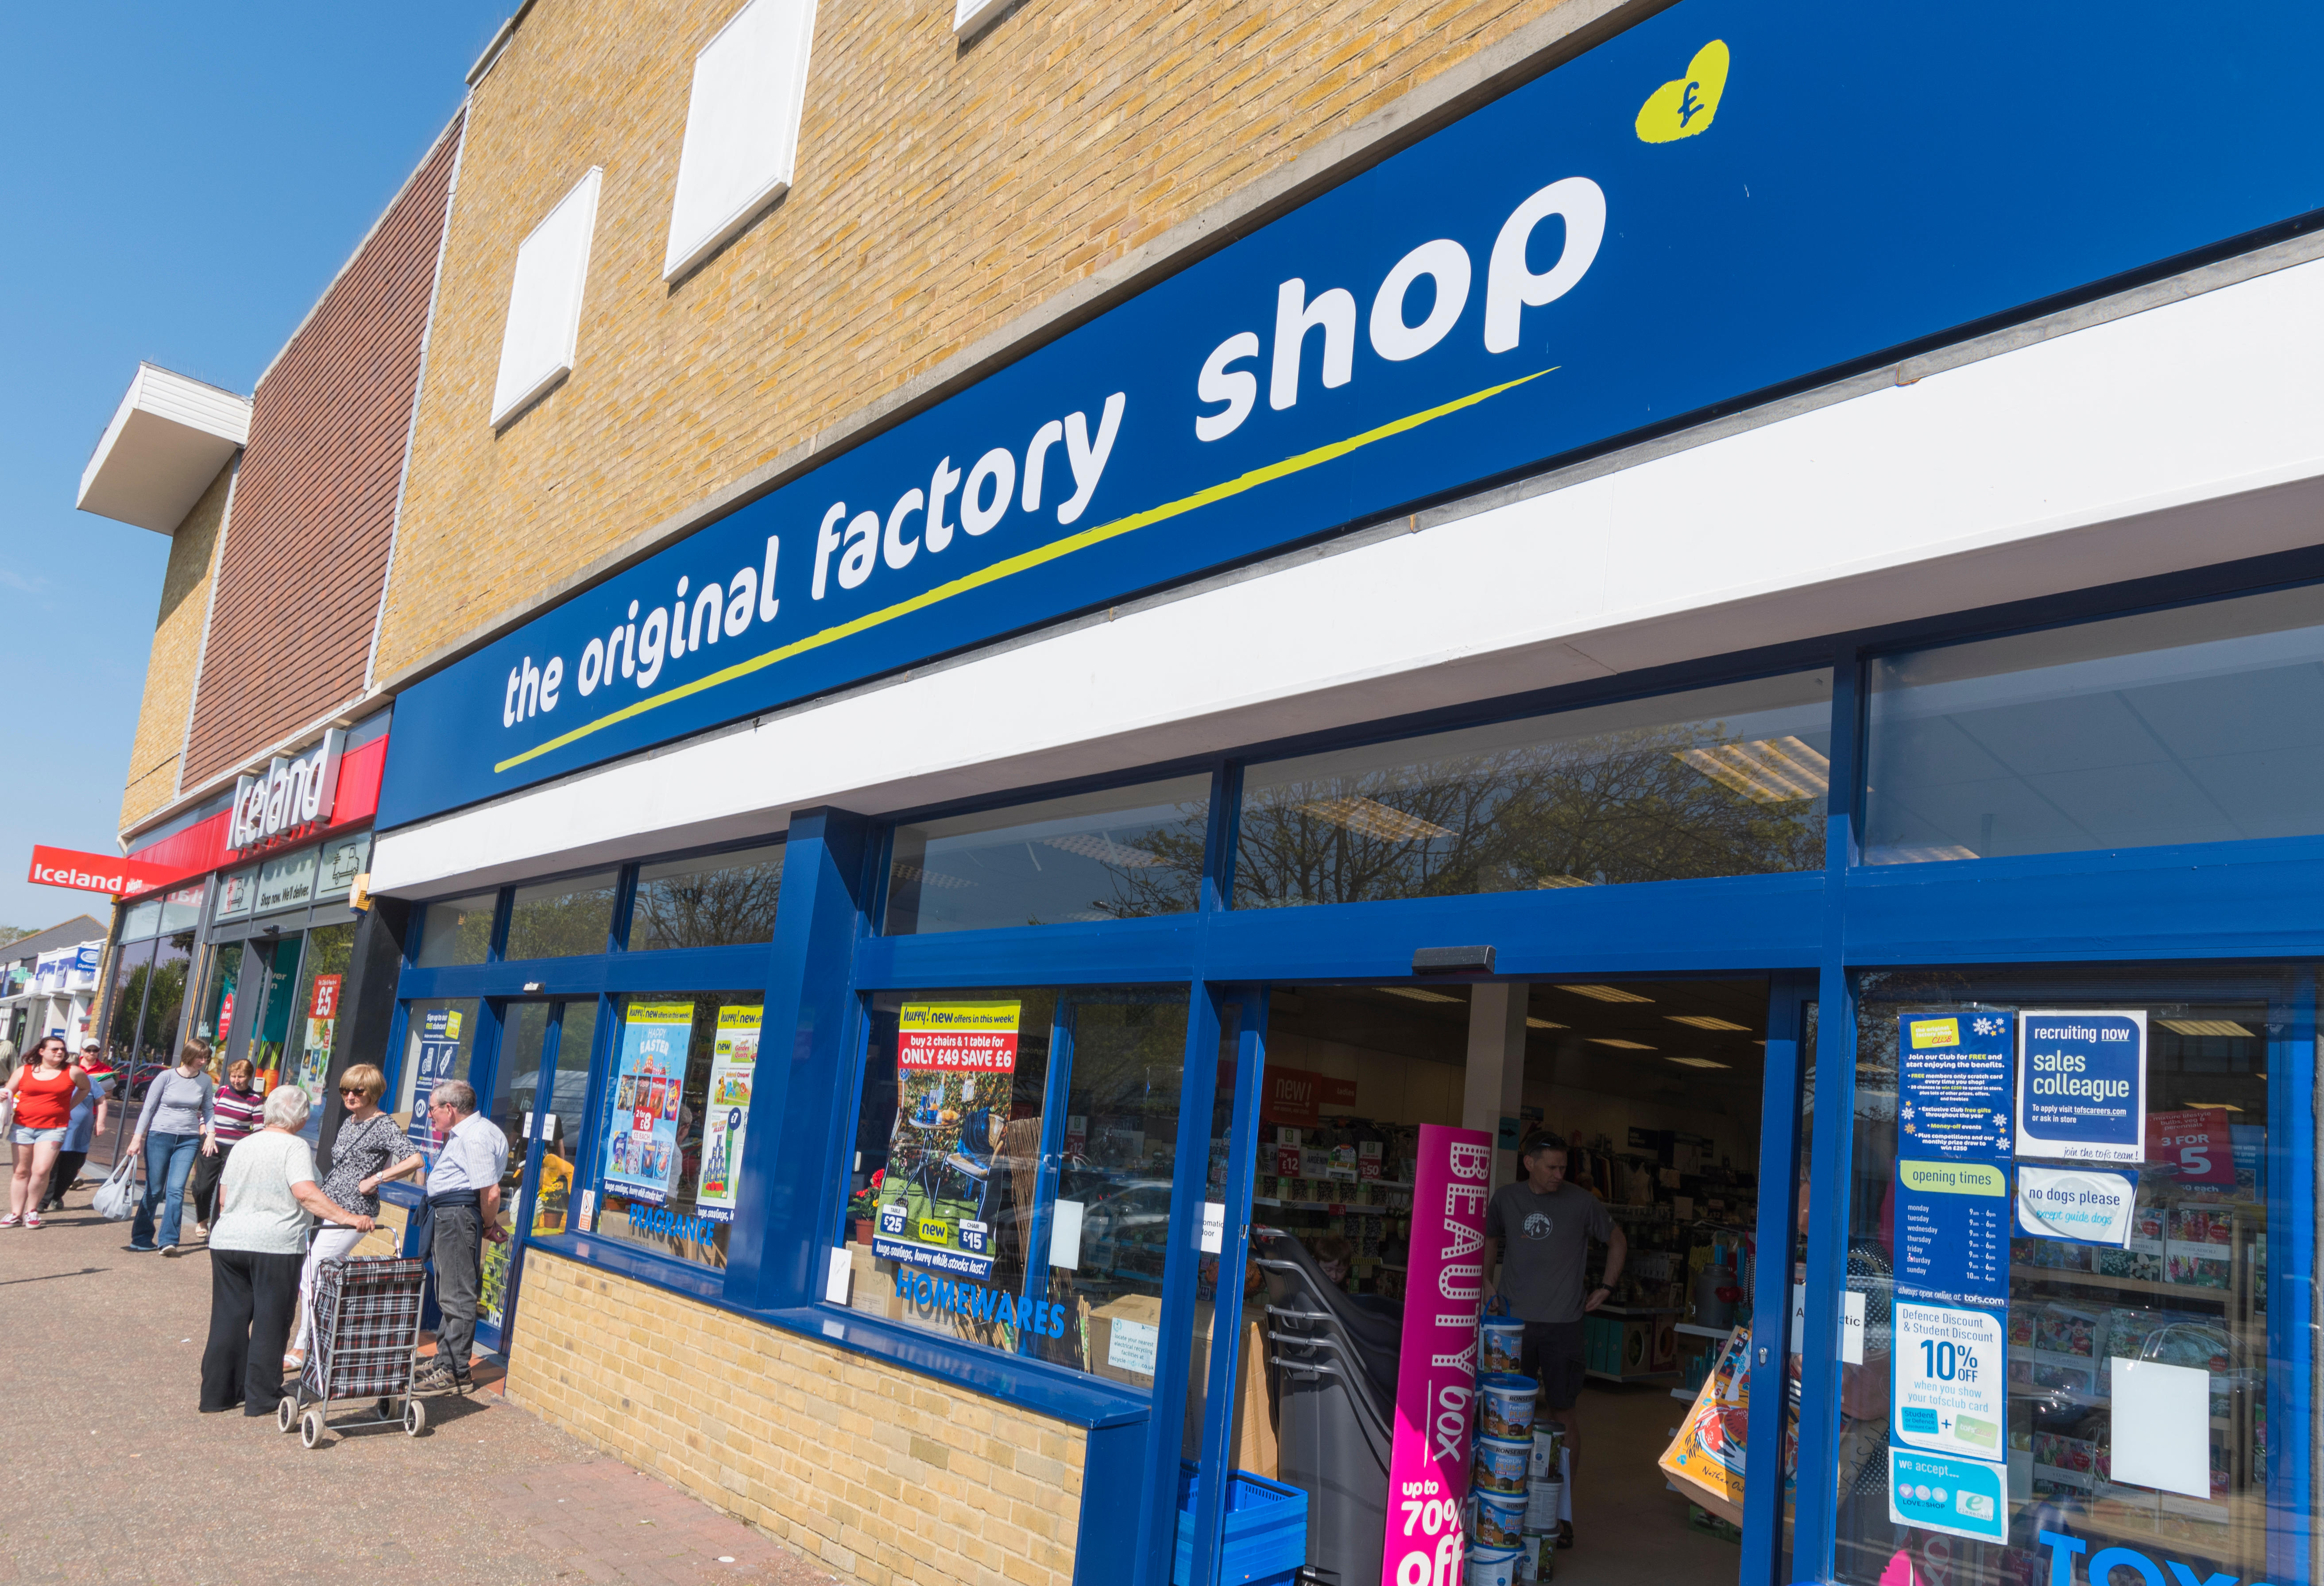 The discounter has closed a number of stores in recent months, but also opened new branches last year